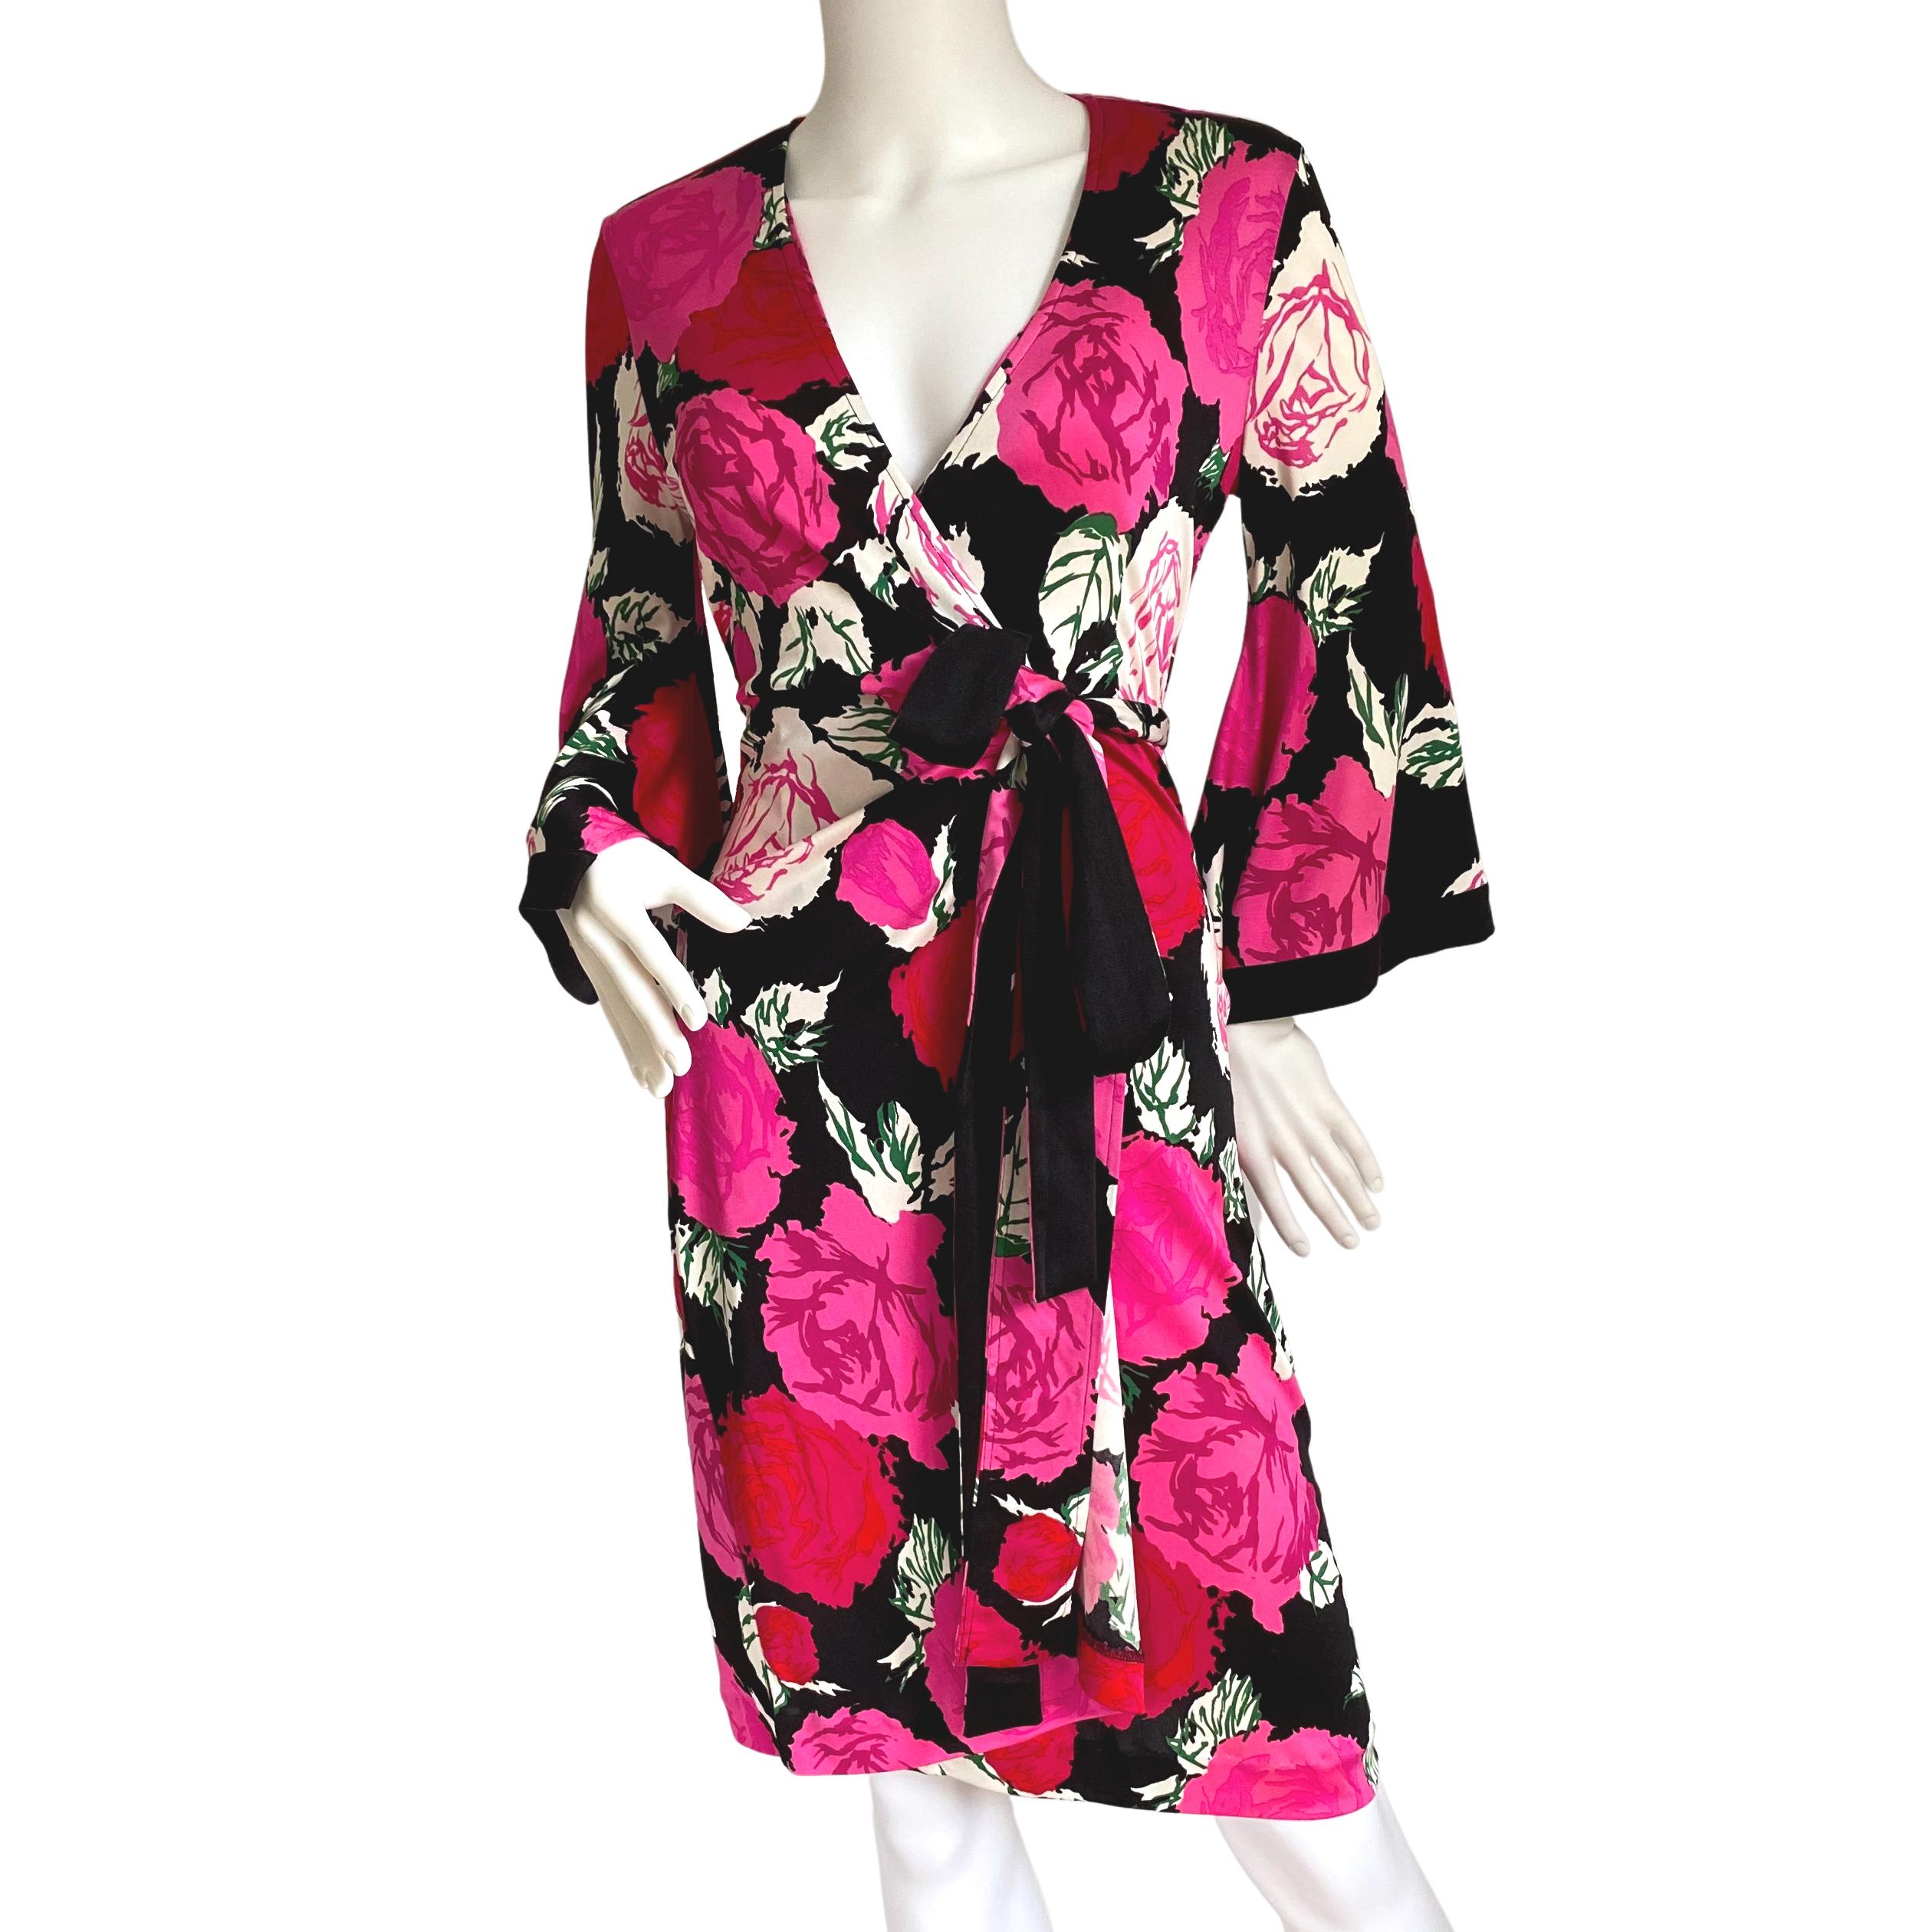 True wrap dress with kimono sleeve.
Print: Deep pink and red climbing roses on black background, trimmed in black.
FLORA KUNG silk dresses are made in premiere quality, long-filament silk yarn which gives a natural simmering glow and a buttery,